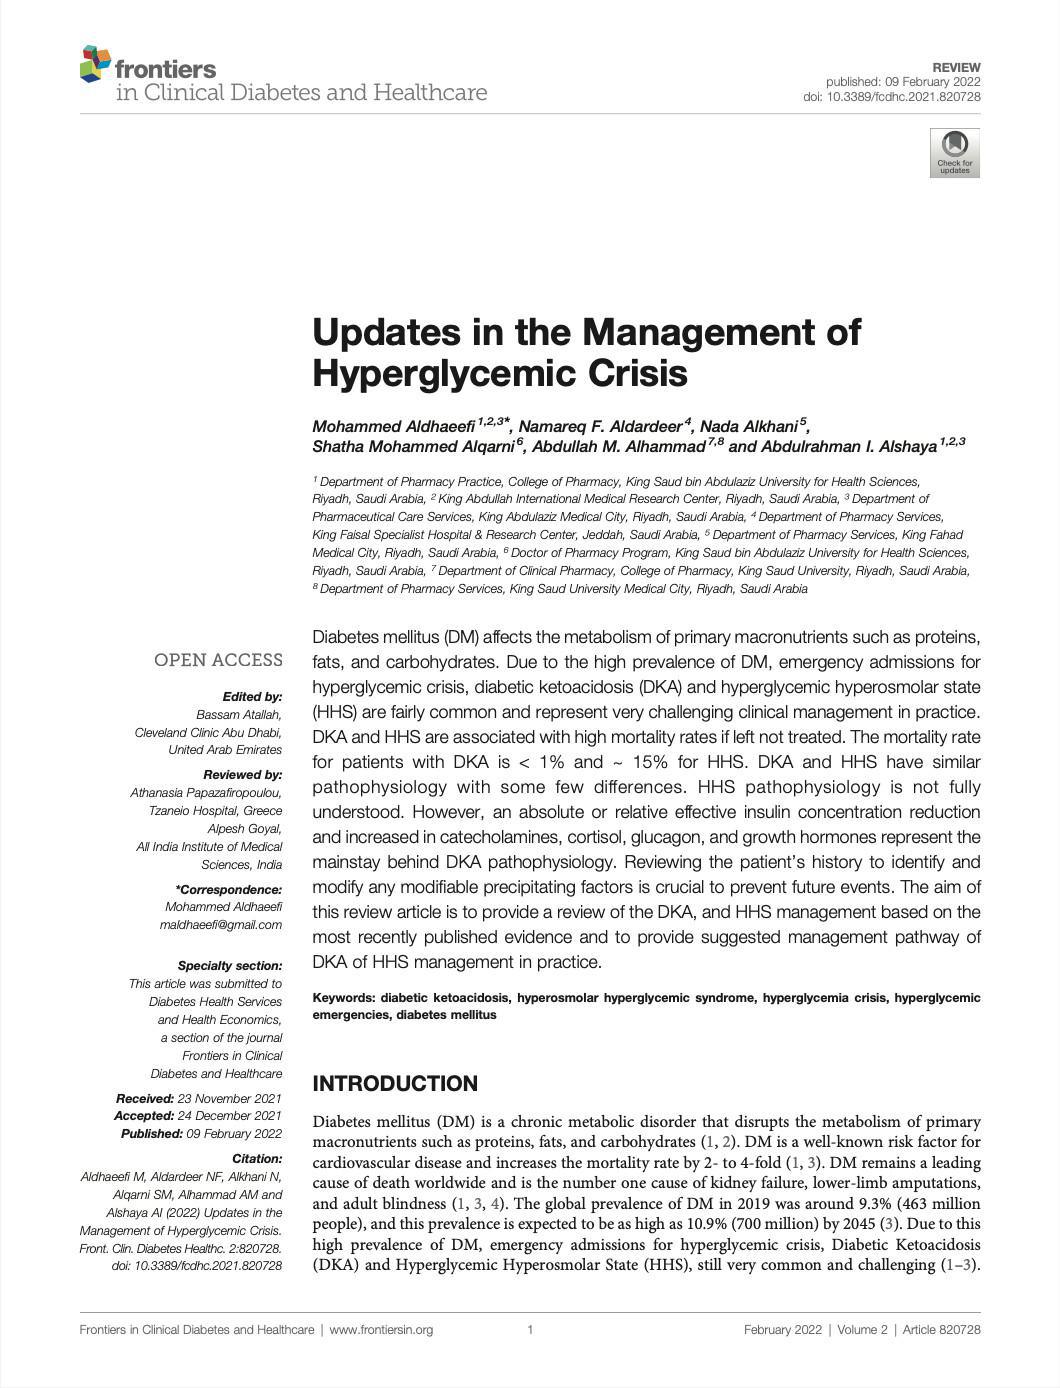 Updates in the Management of Hyperglycemic Crisis